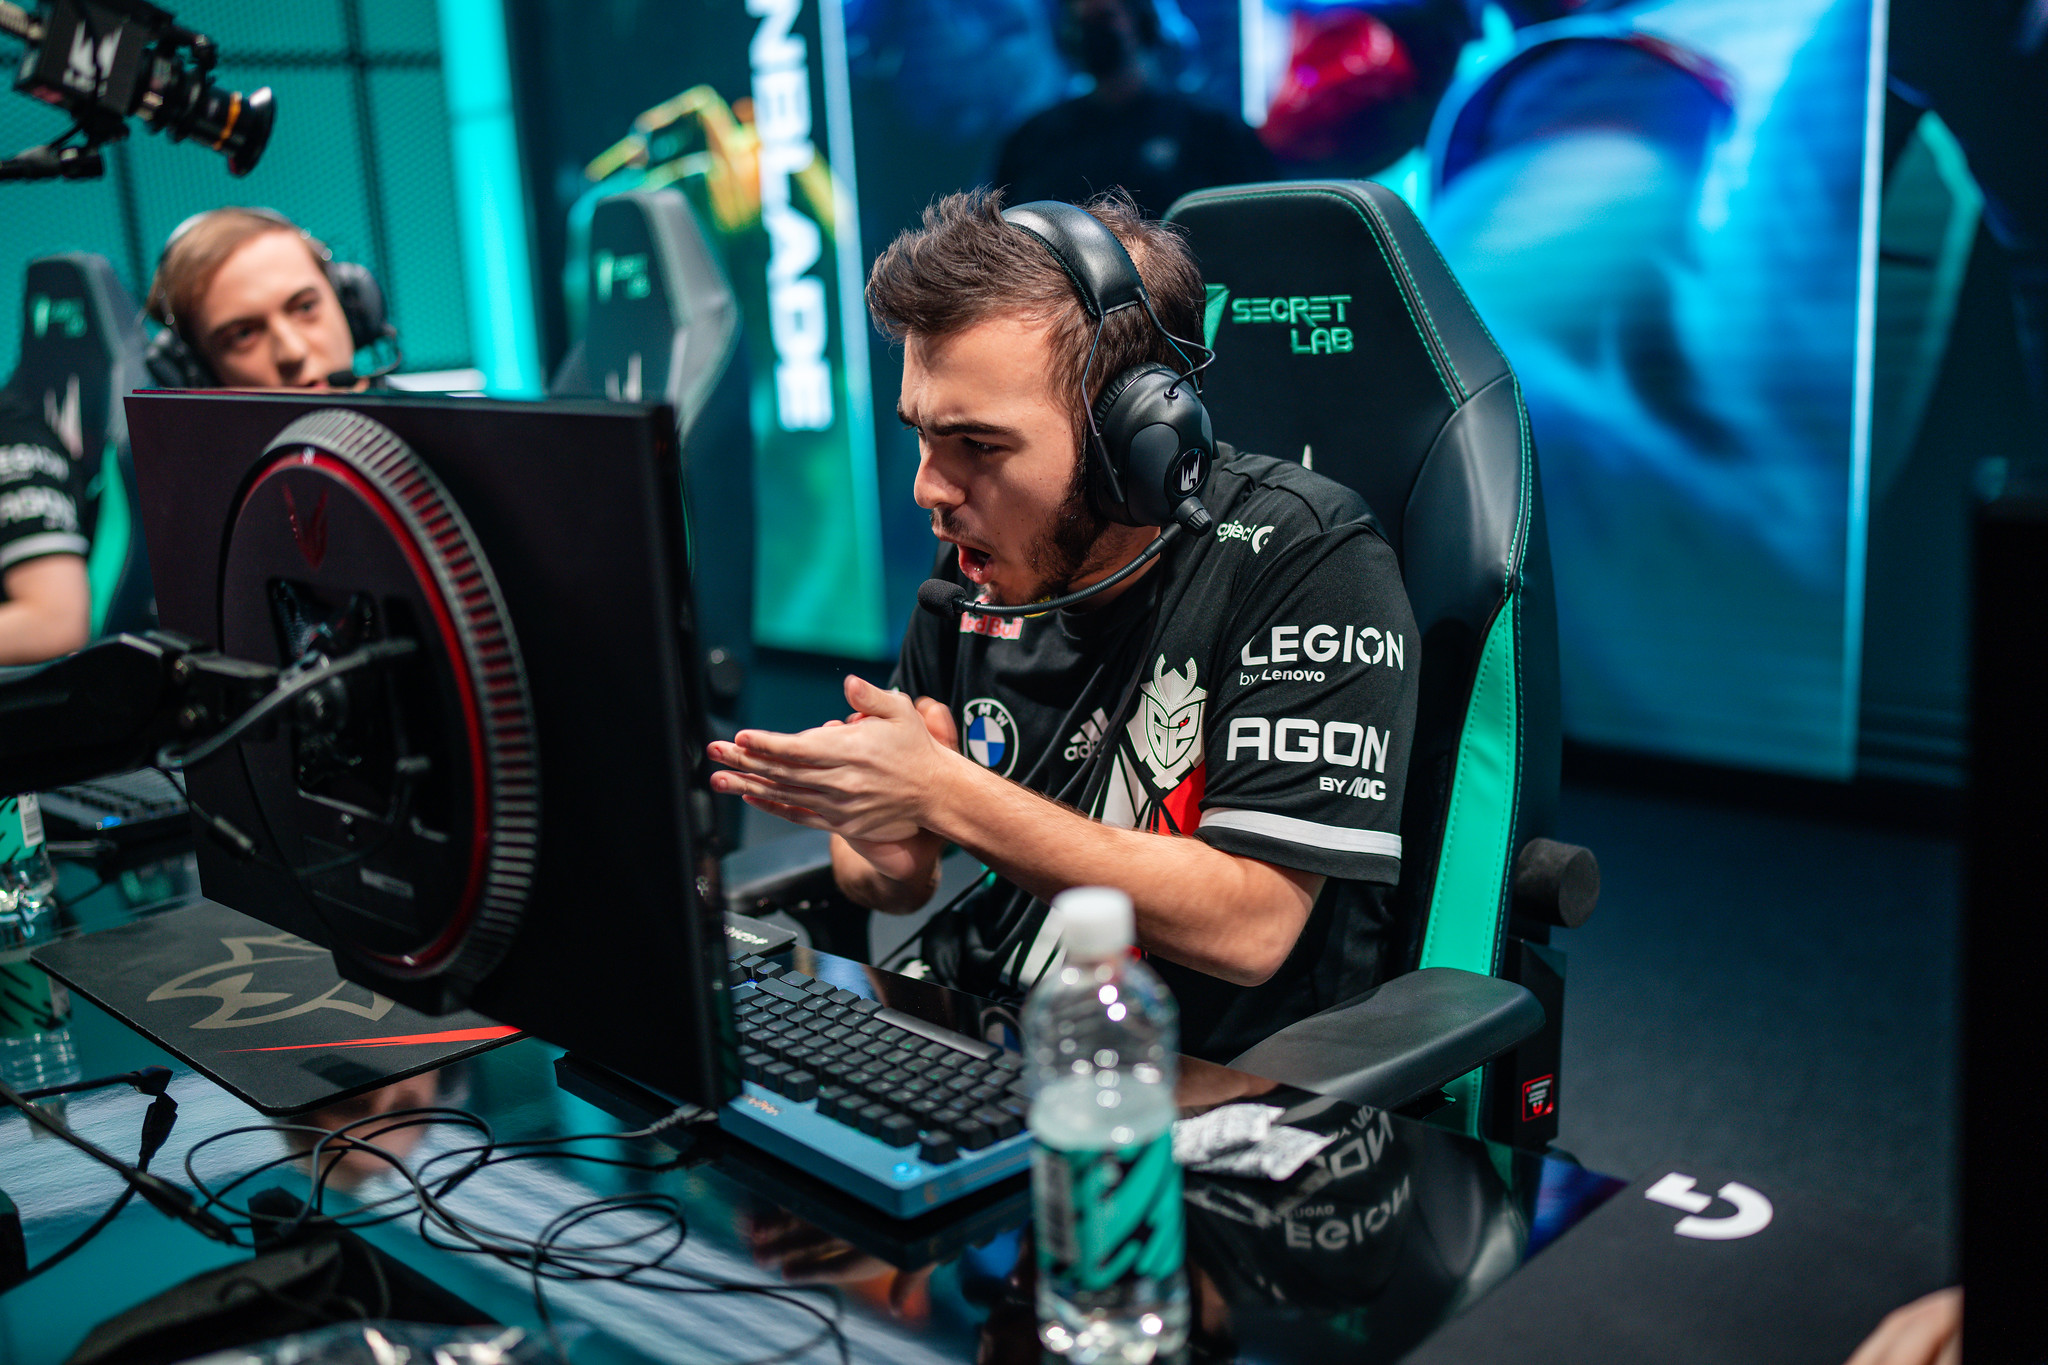 Flakked is not entirely sure what is going on, but things have gone smoothly for G2 Esports in Week 1 of the LEC summer split.